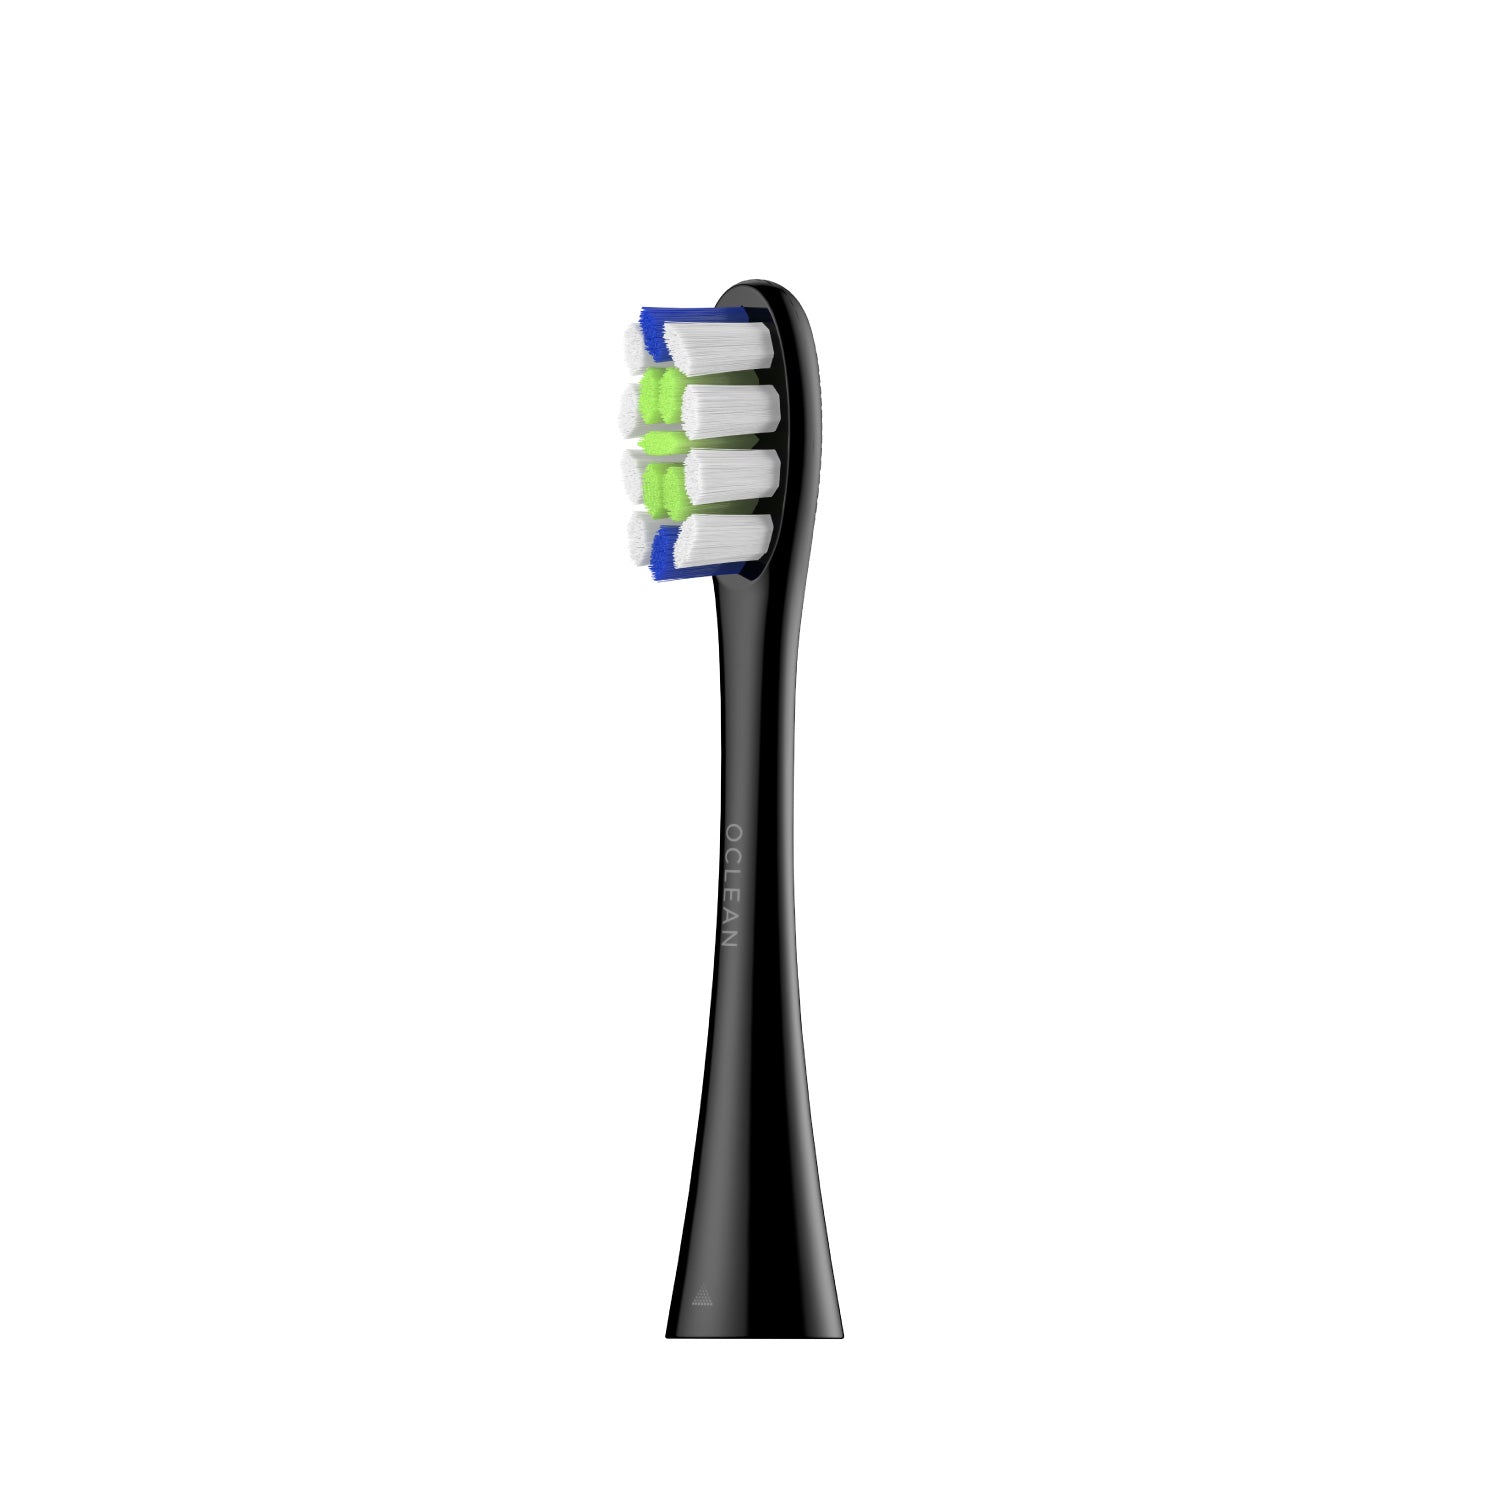 Oclean Brush Heads Refills Toothbrush Replacement Heads Plaque Control P1C5 Oclean Official